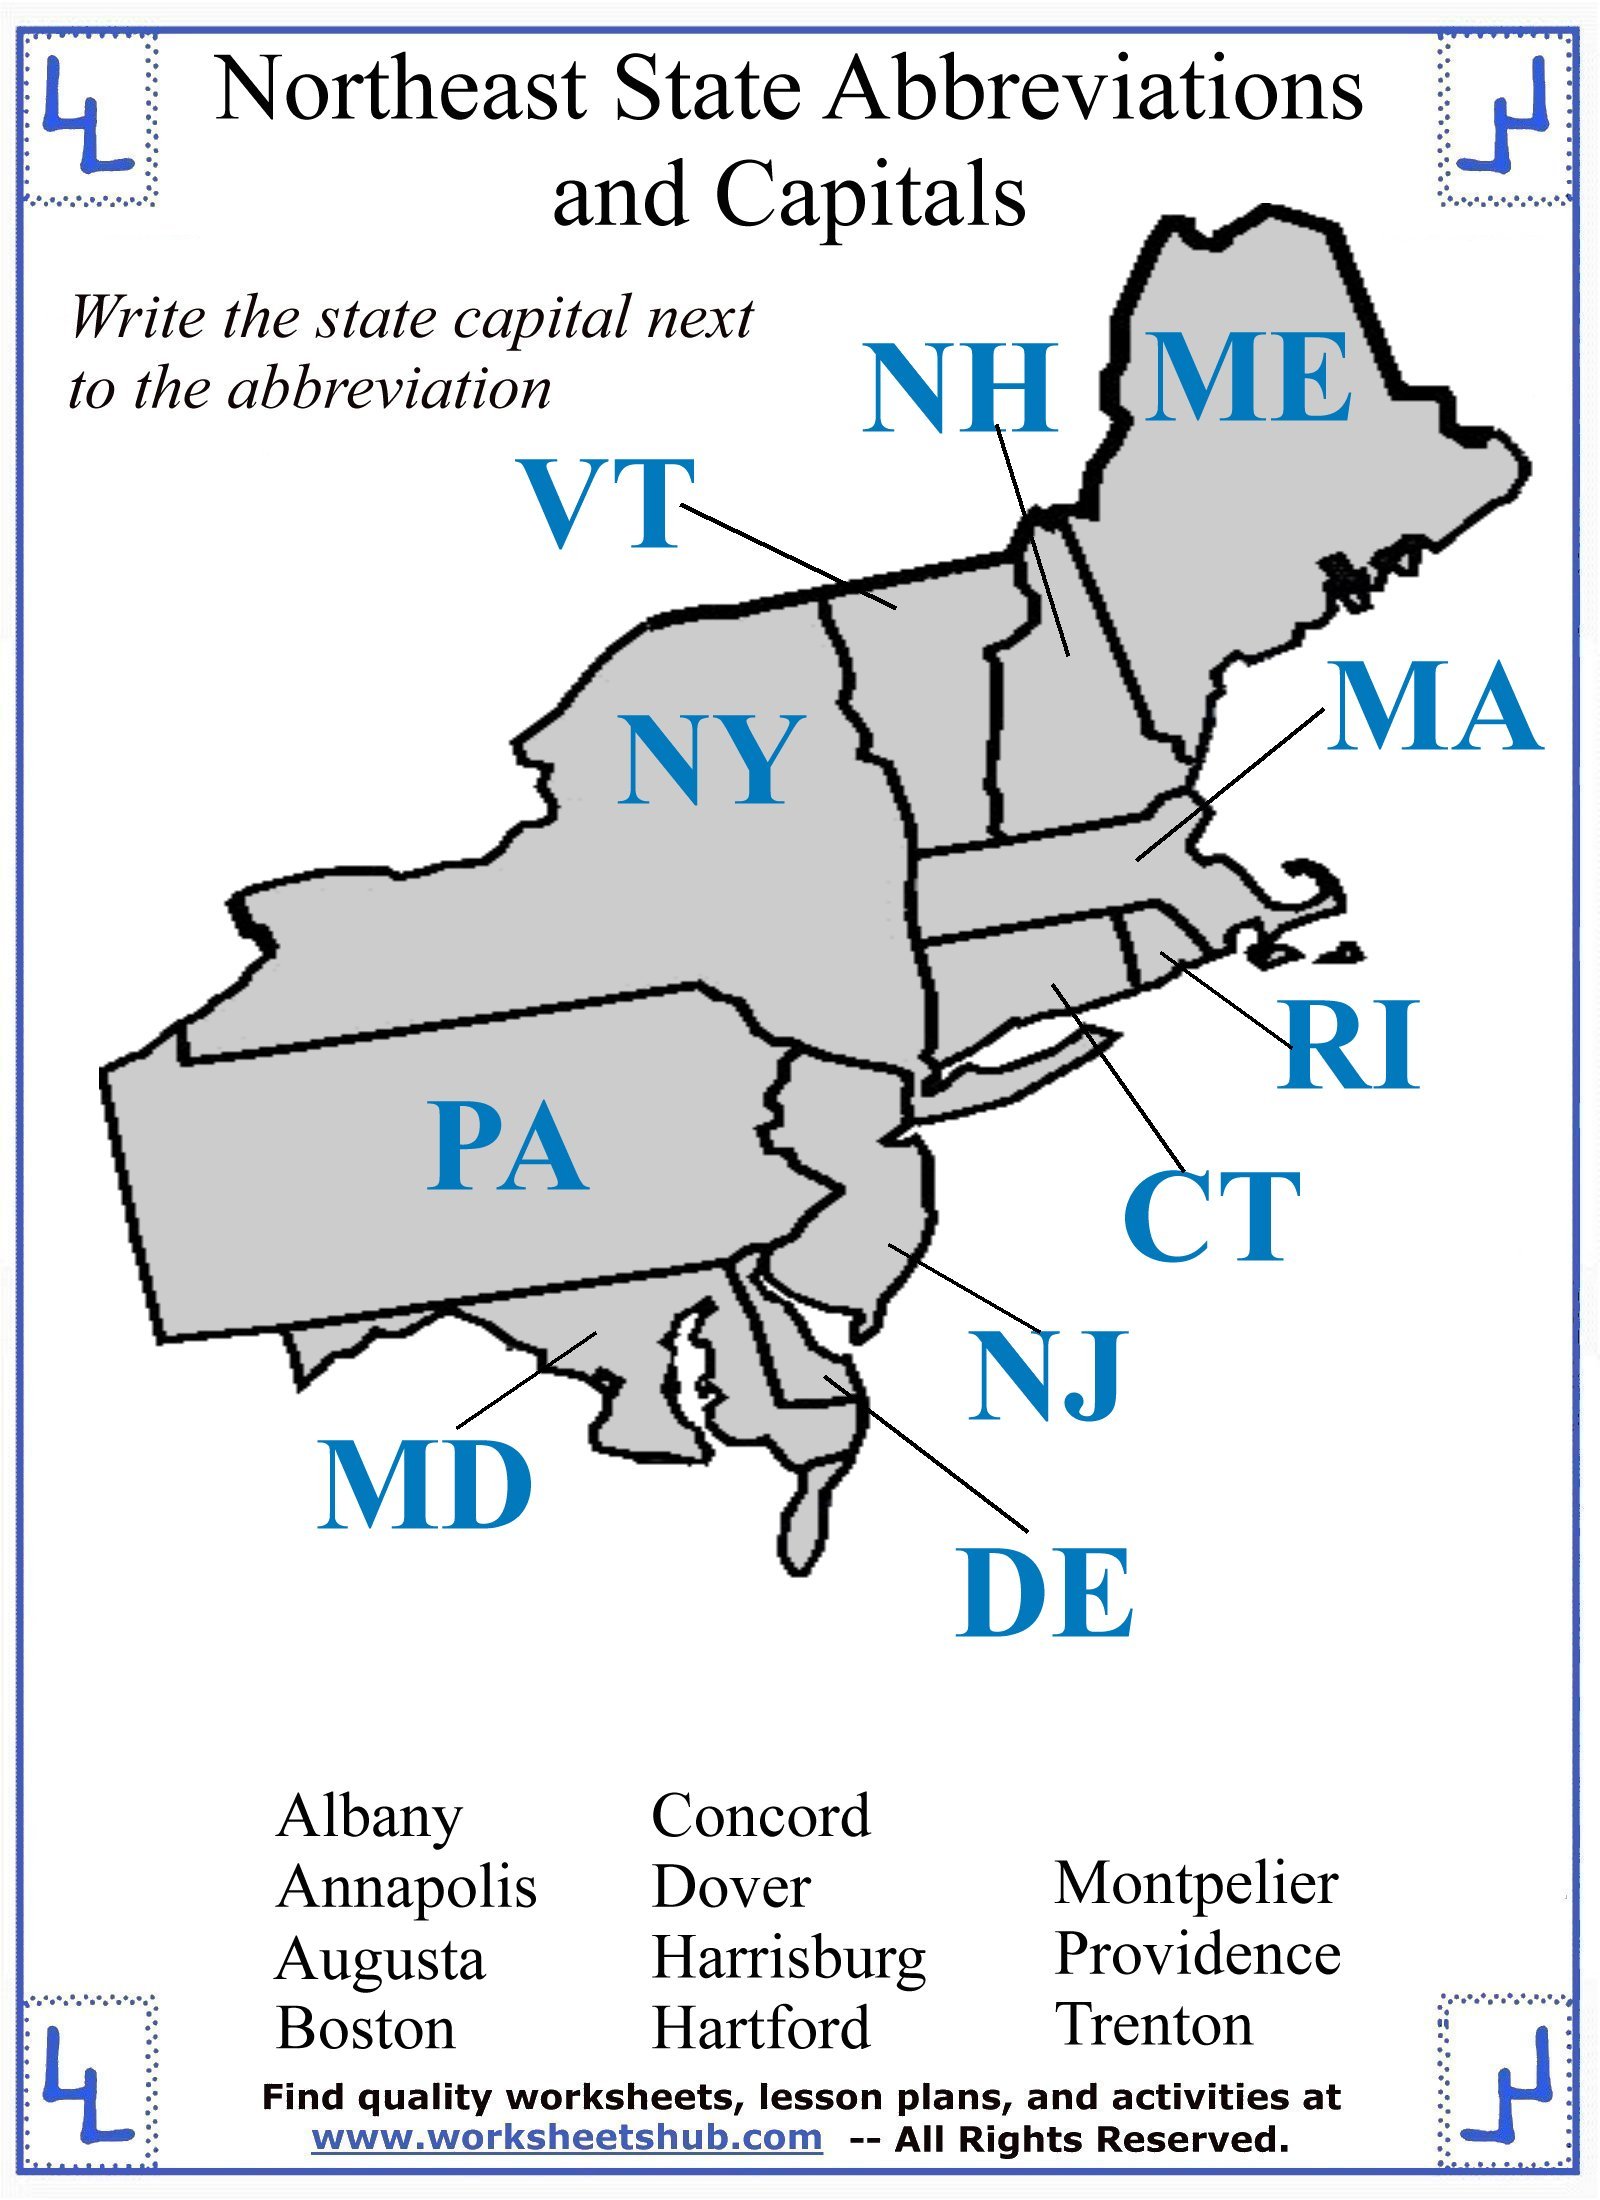 fourth-grade-social-studies-northeast-region-states-and-capitals